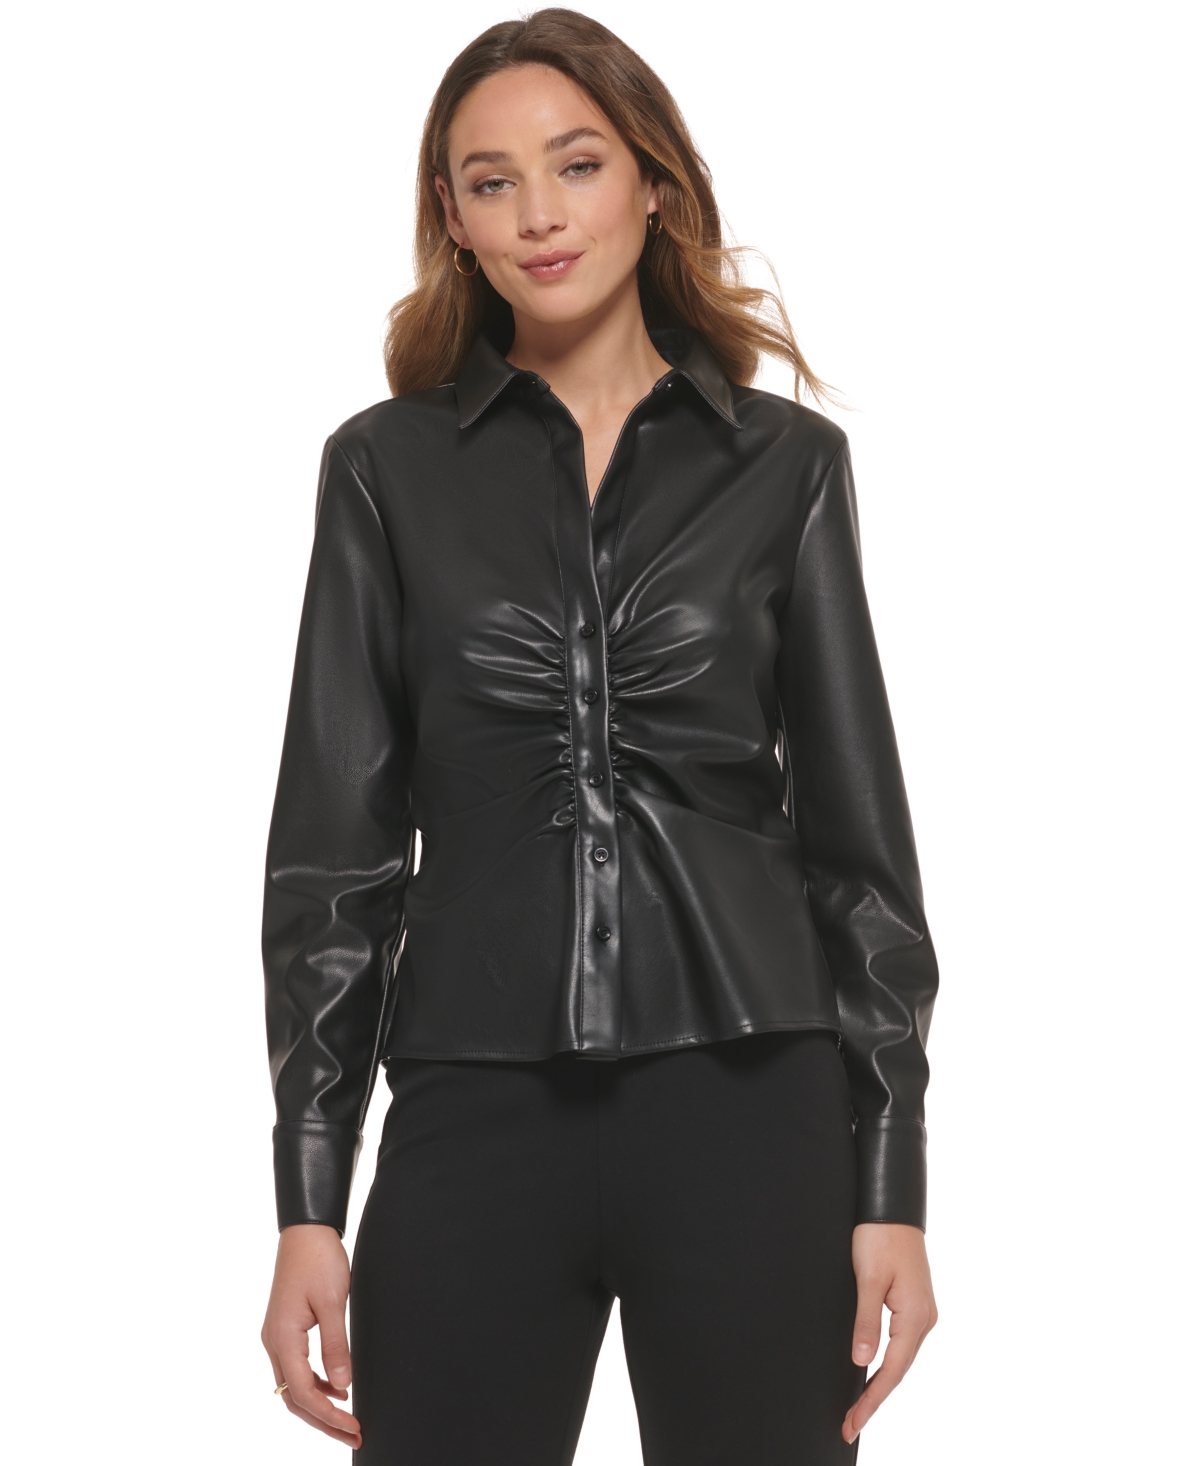 DKNY WOMEN'S FAUX-LEATHER RUCHED BUTTON-FRONT BLOUSE